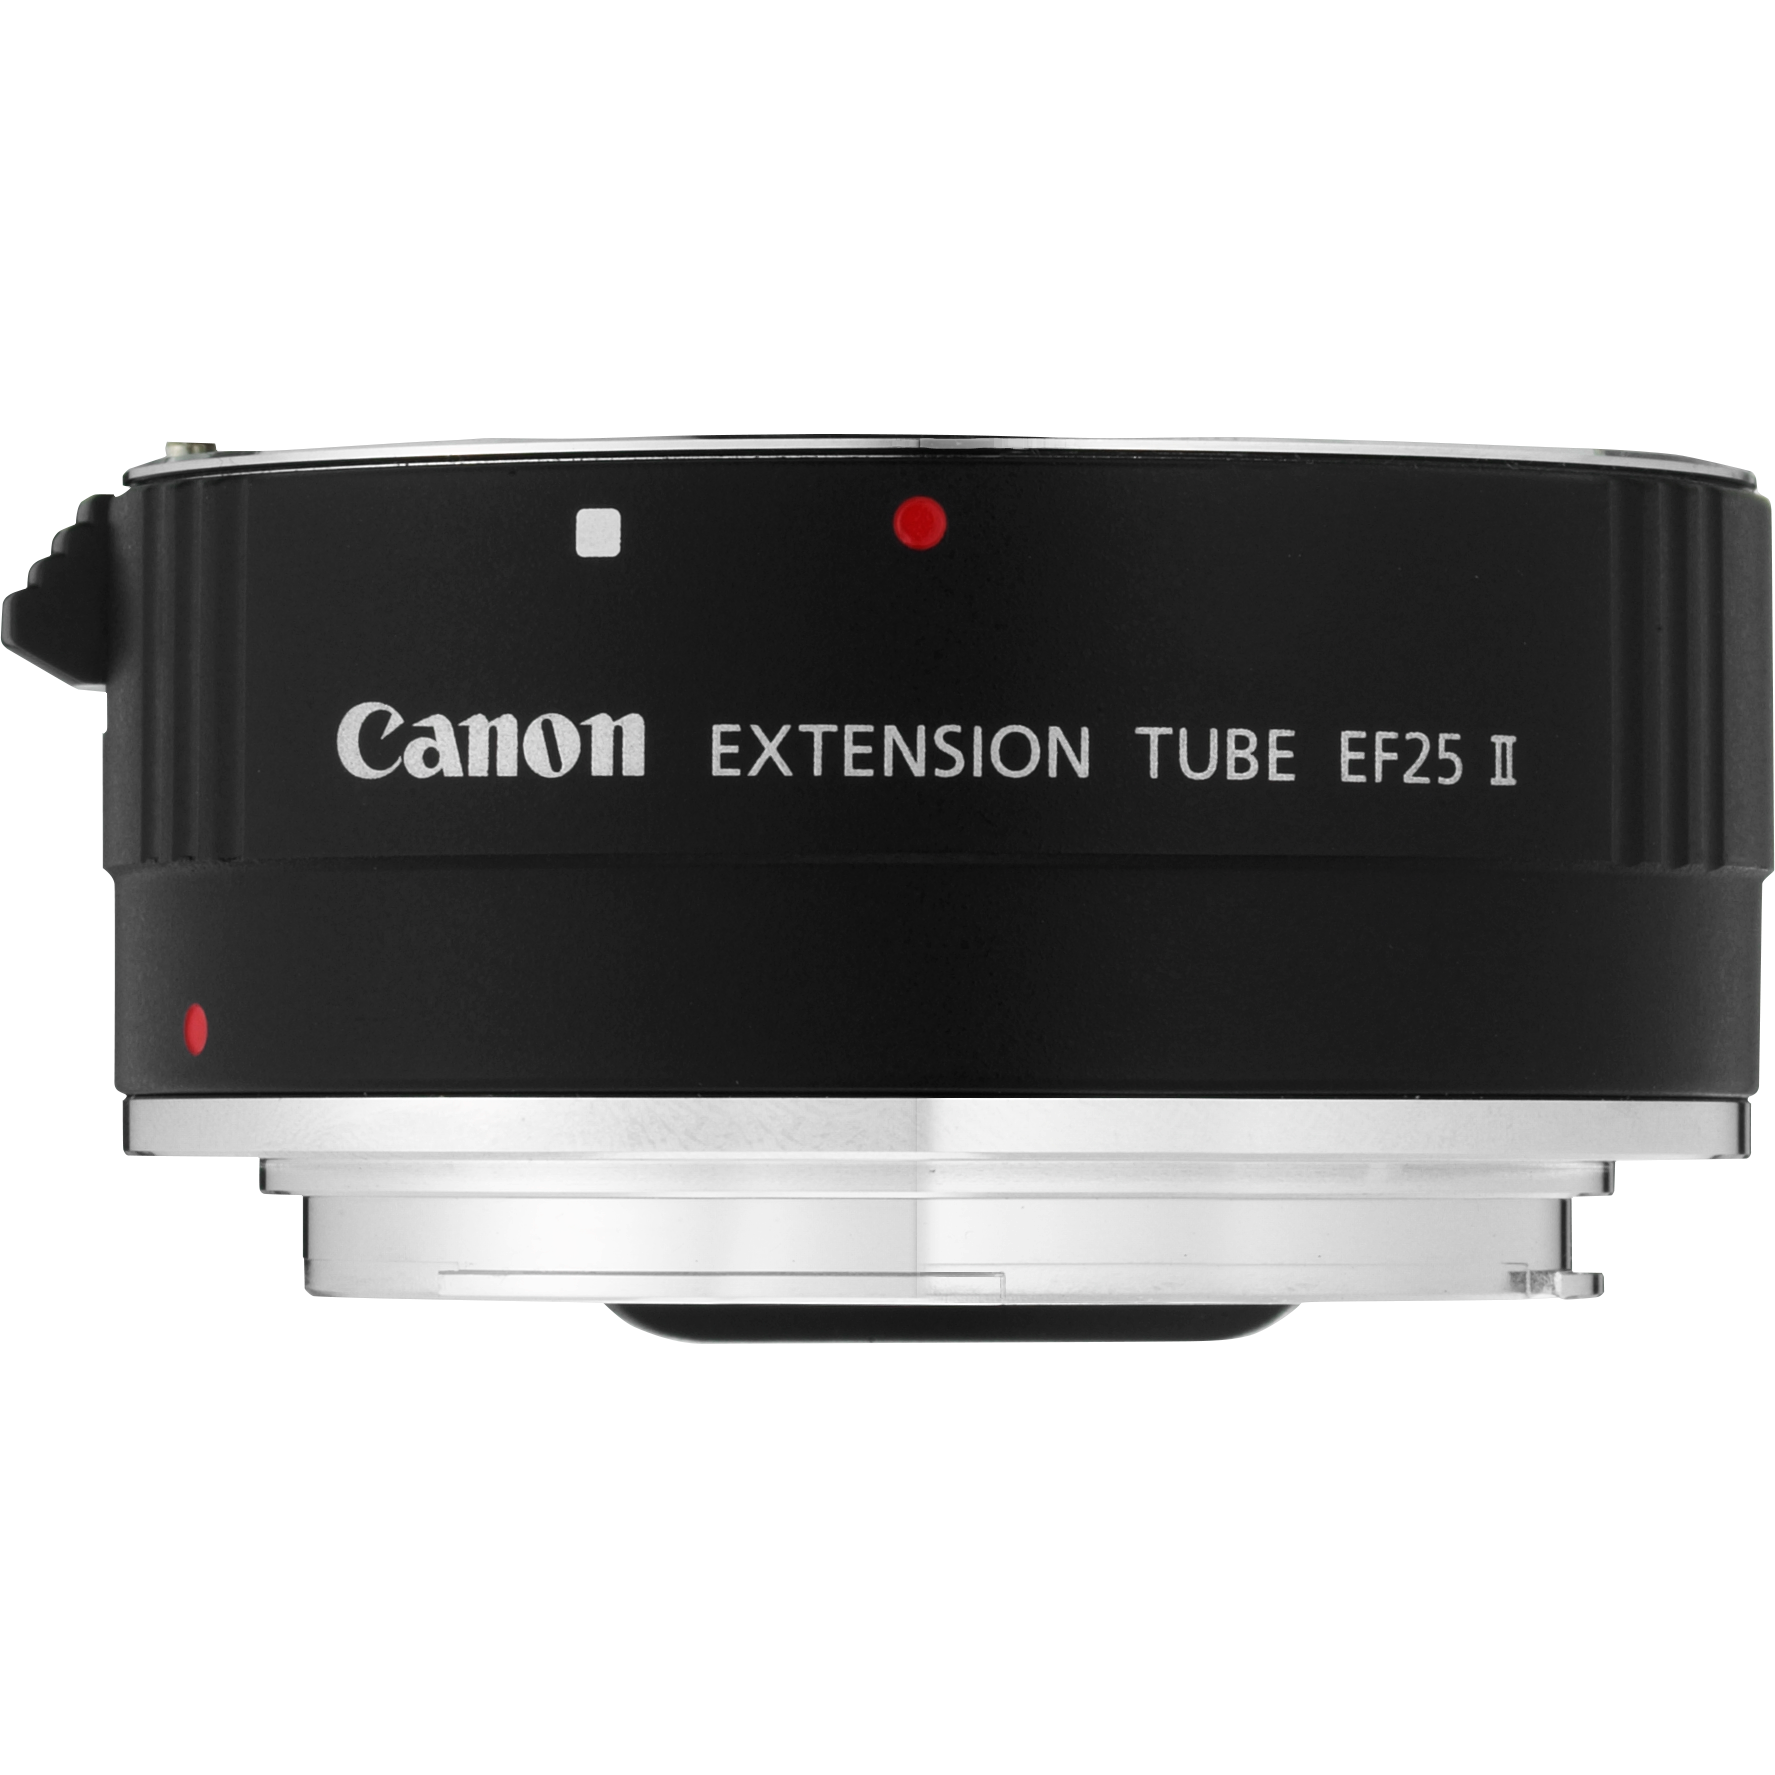 Buy Canon Extension Tube EF 25 II — Canon UK Store